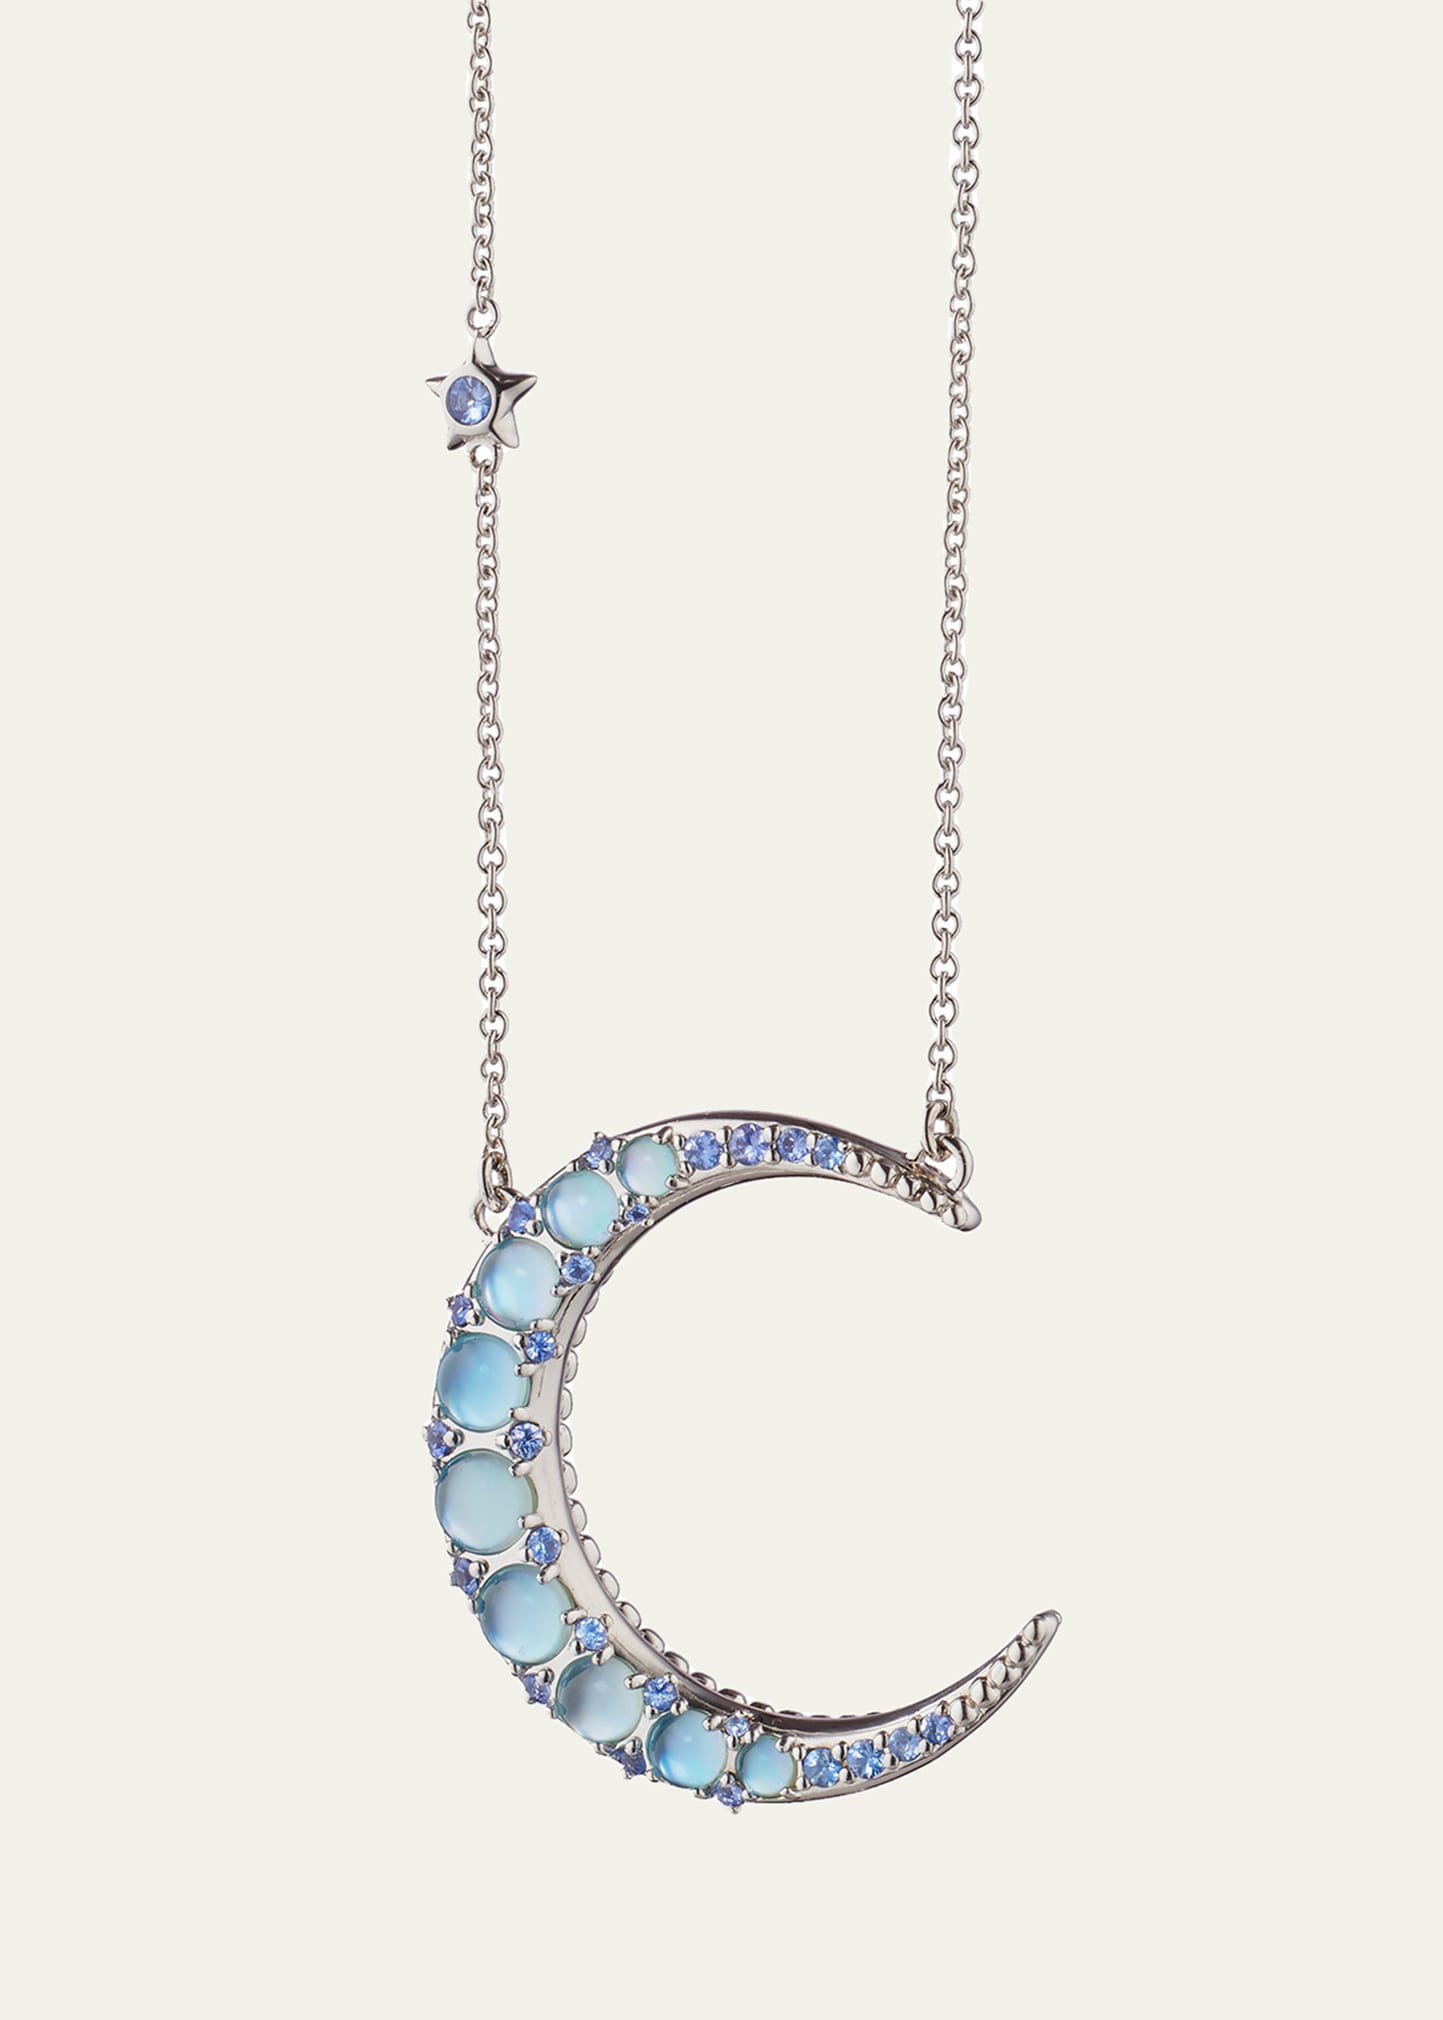 Rounded Crescent Moon Charm Necklace with Blue Topaz and Sapphires